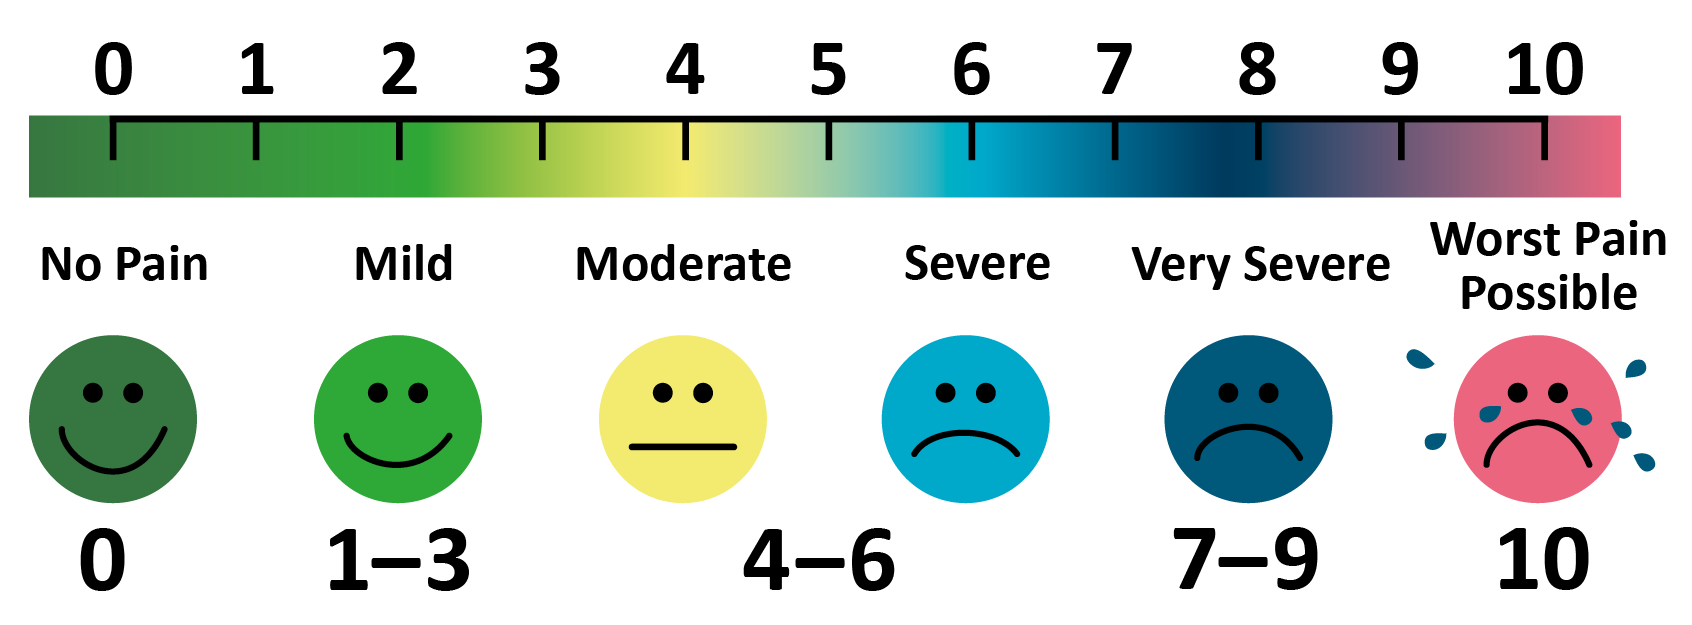 Exercise pain scale